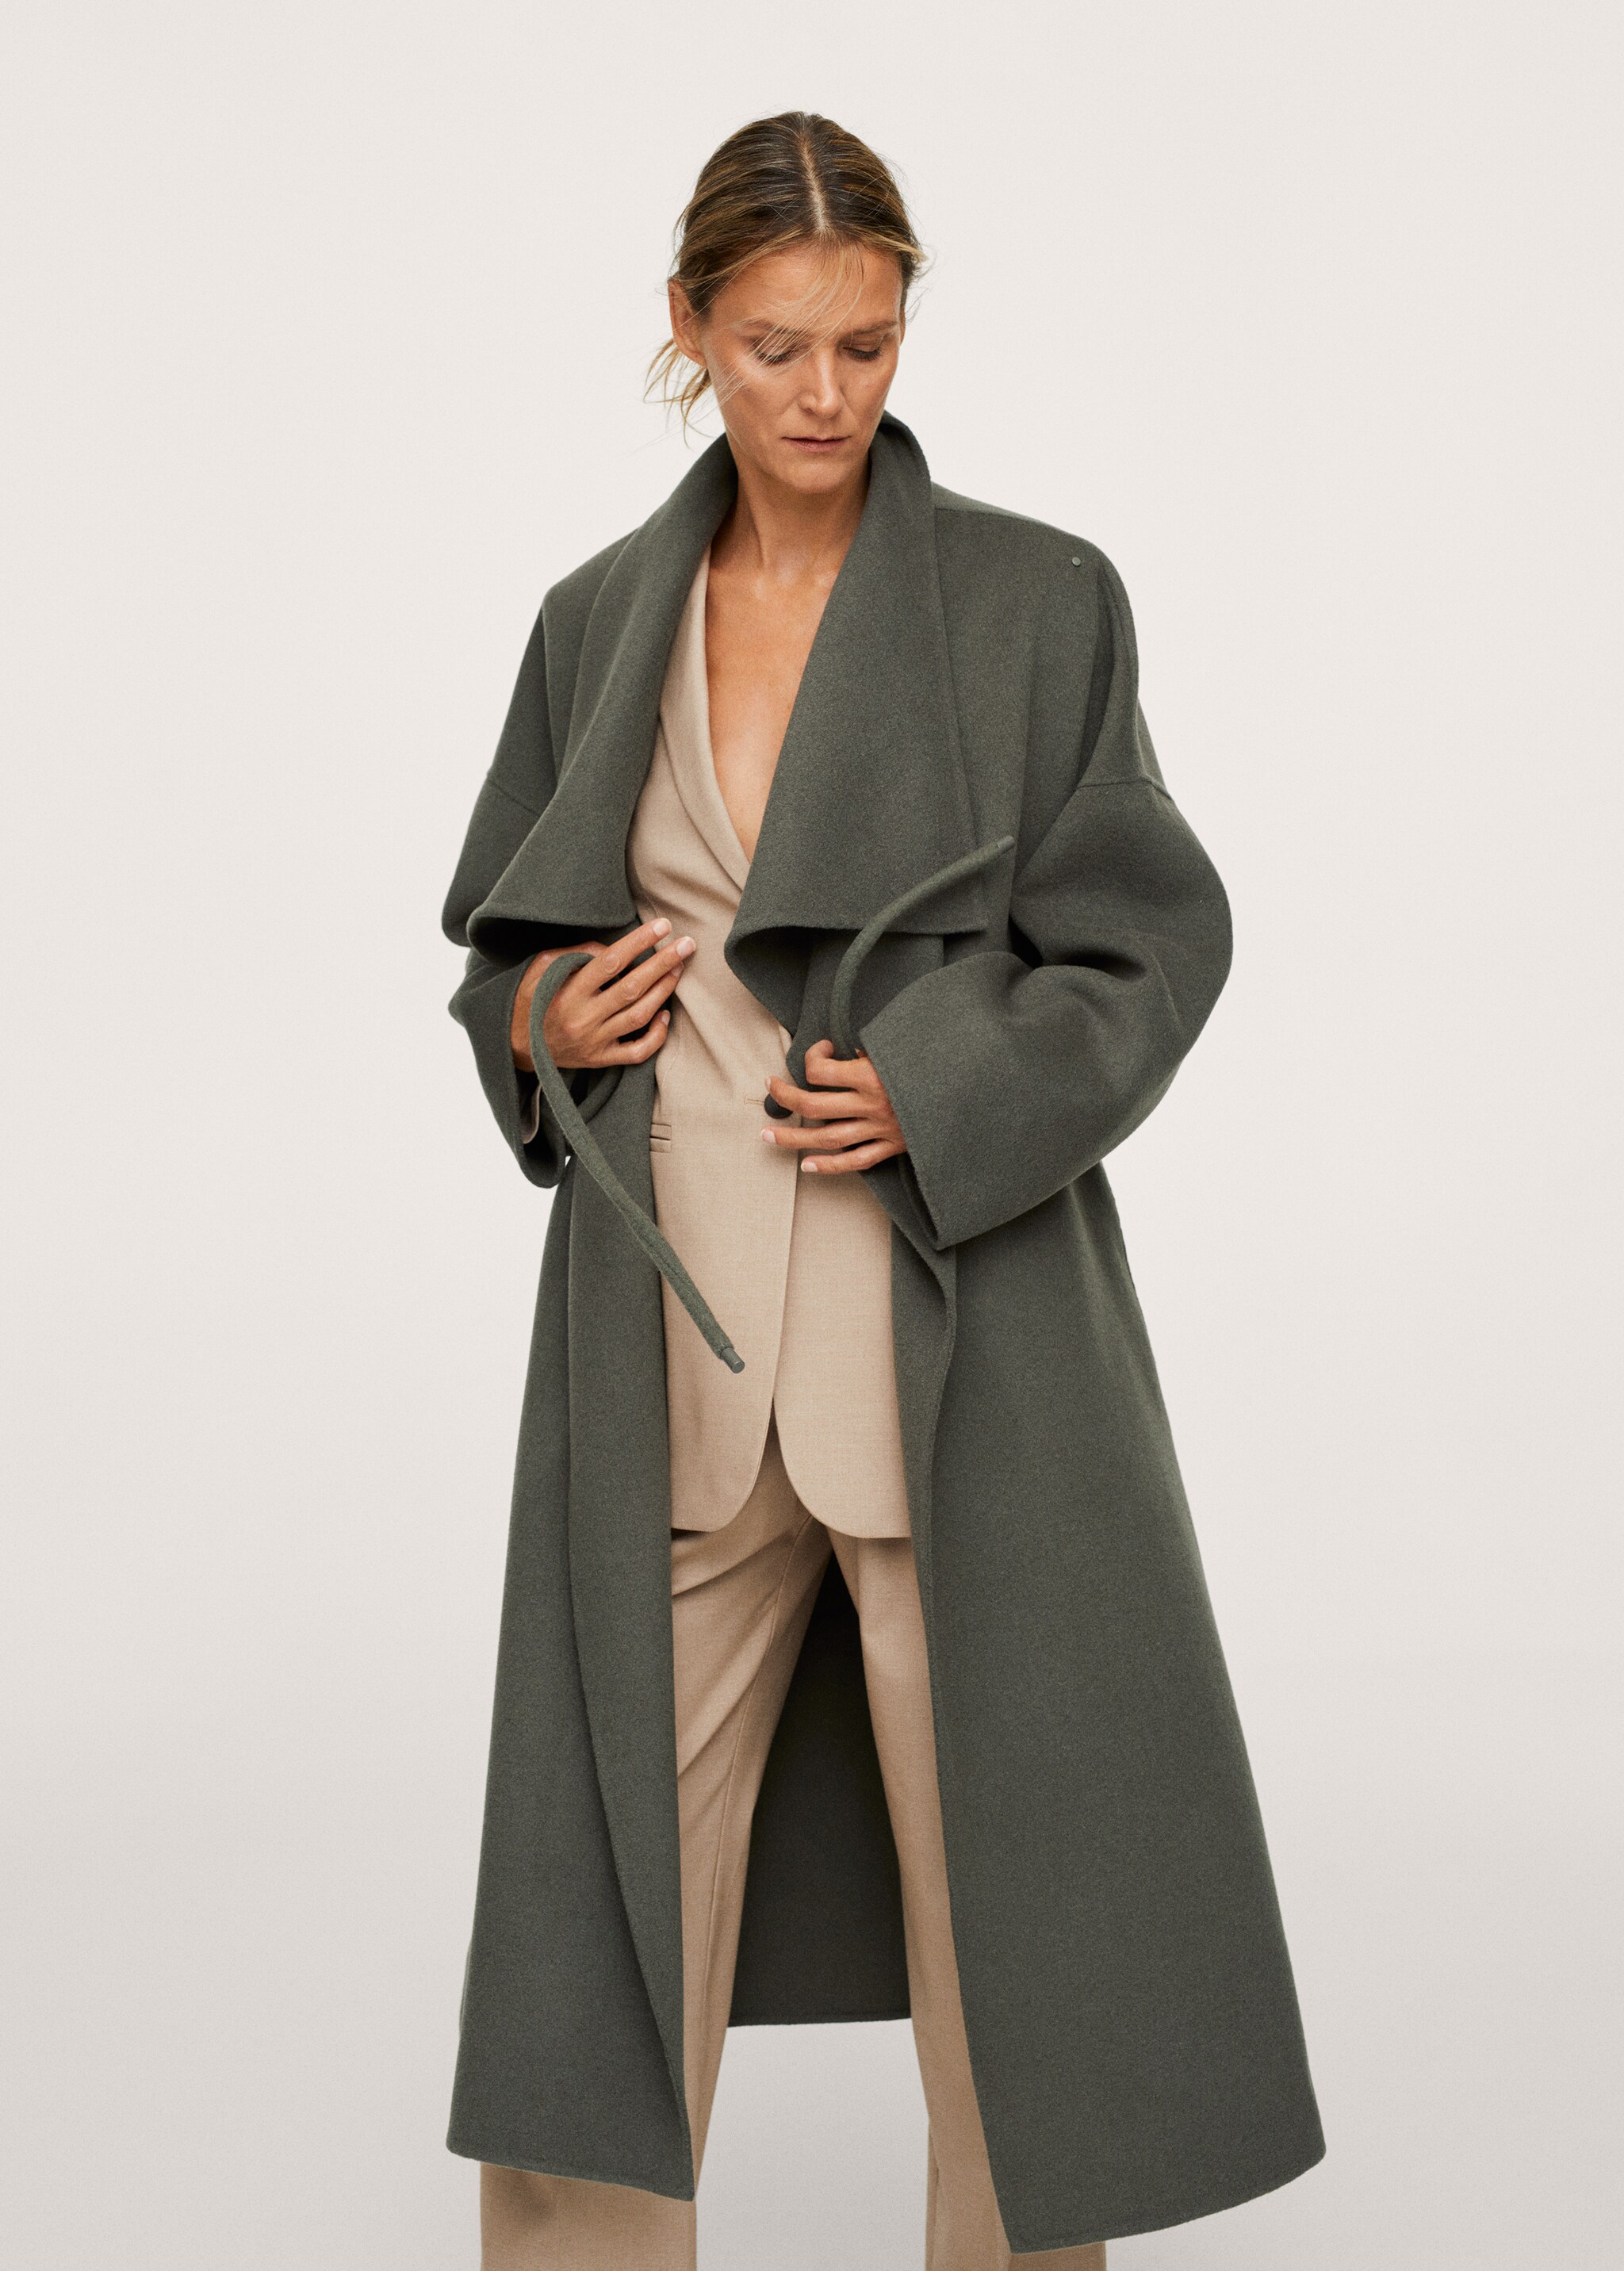 Handmade wool coat - Details of the article 1